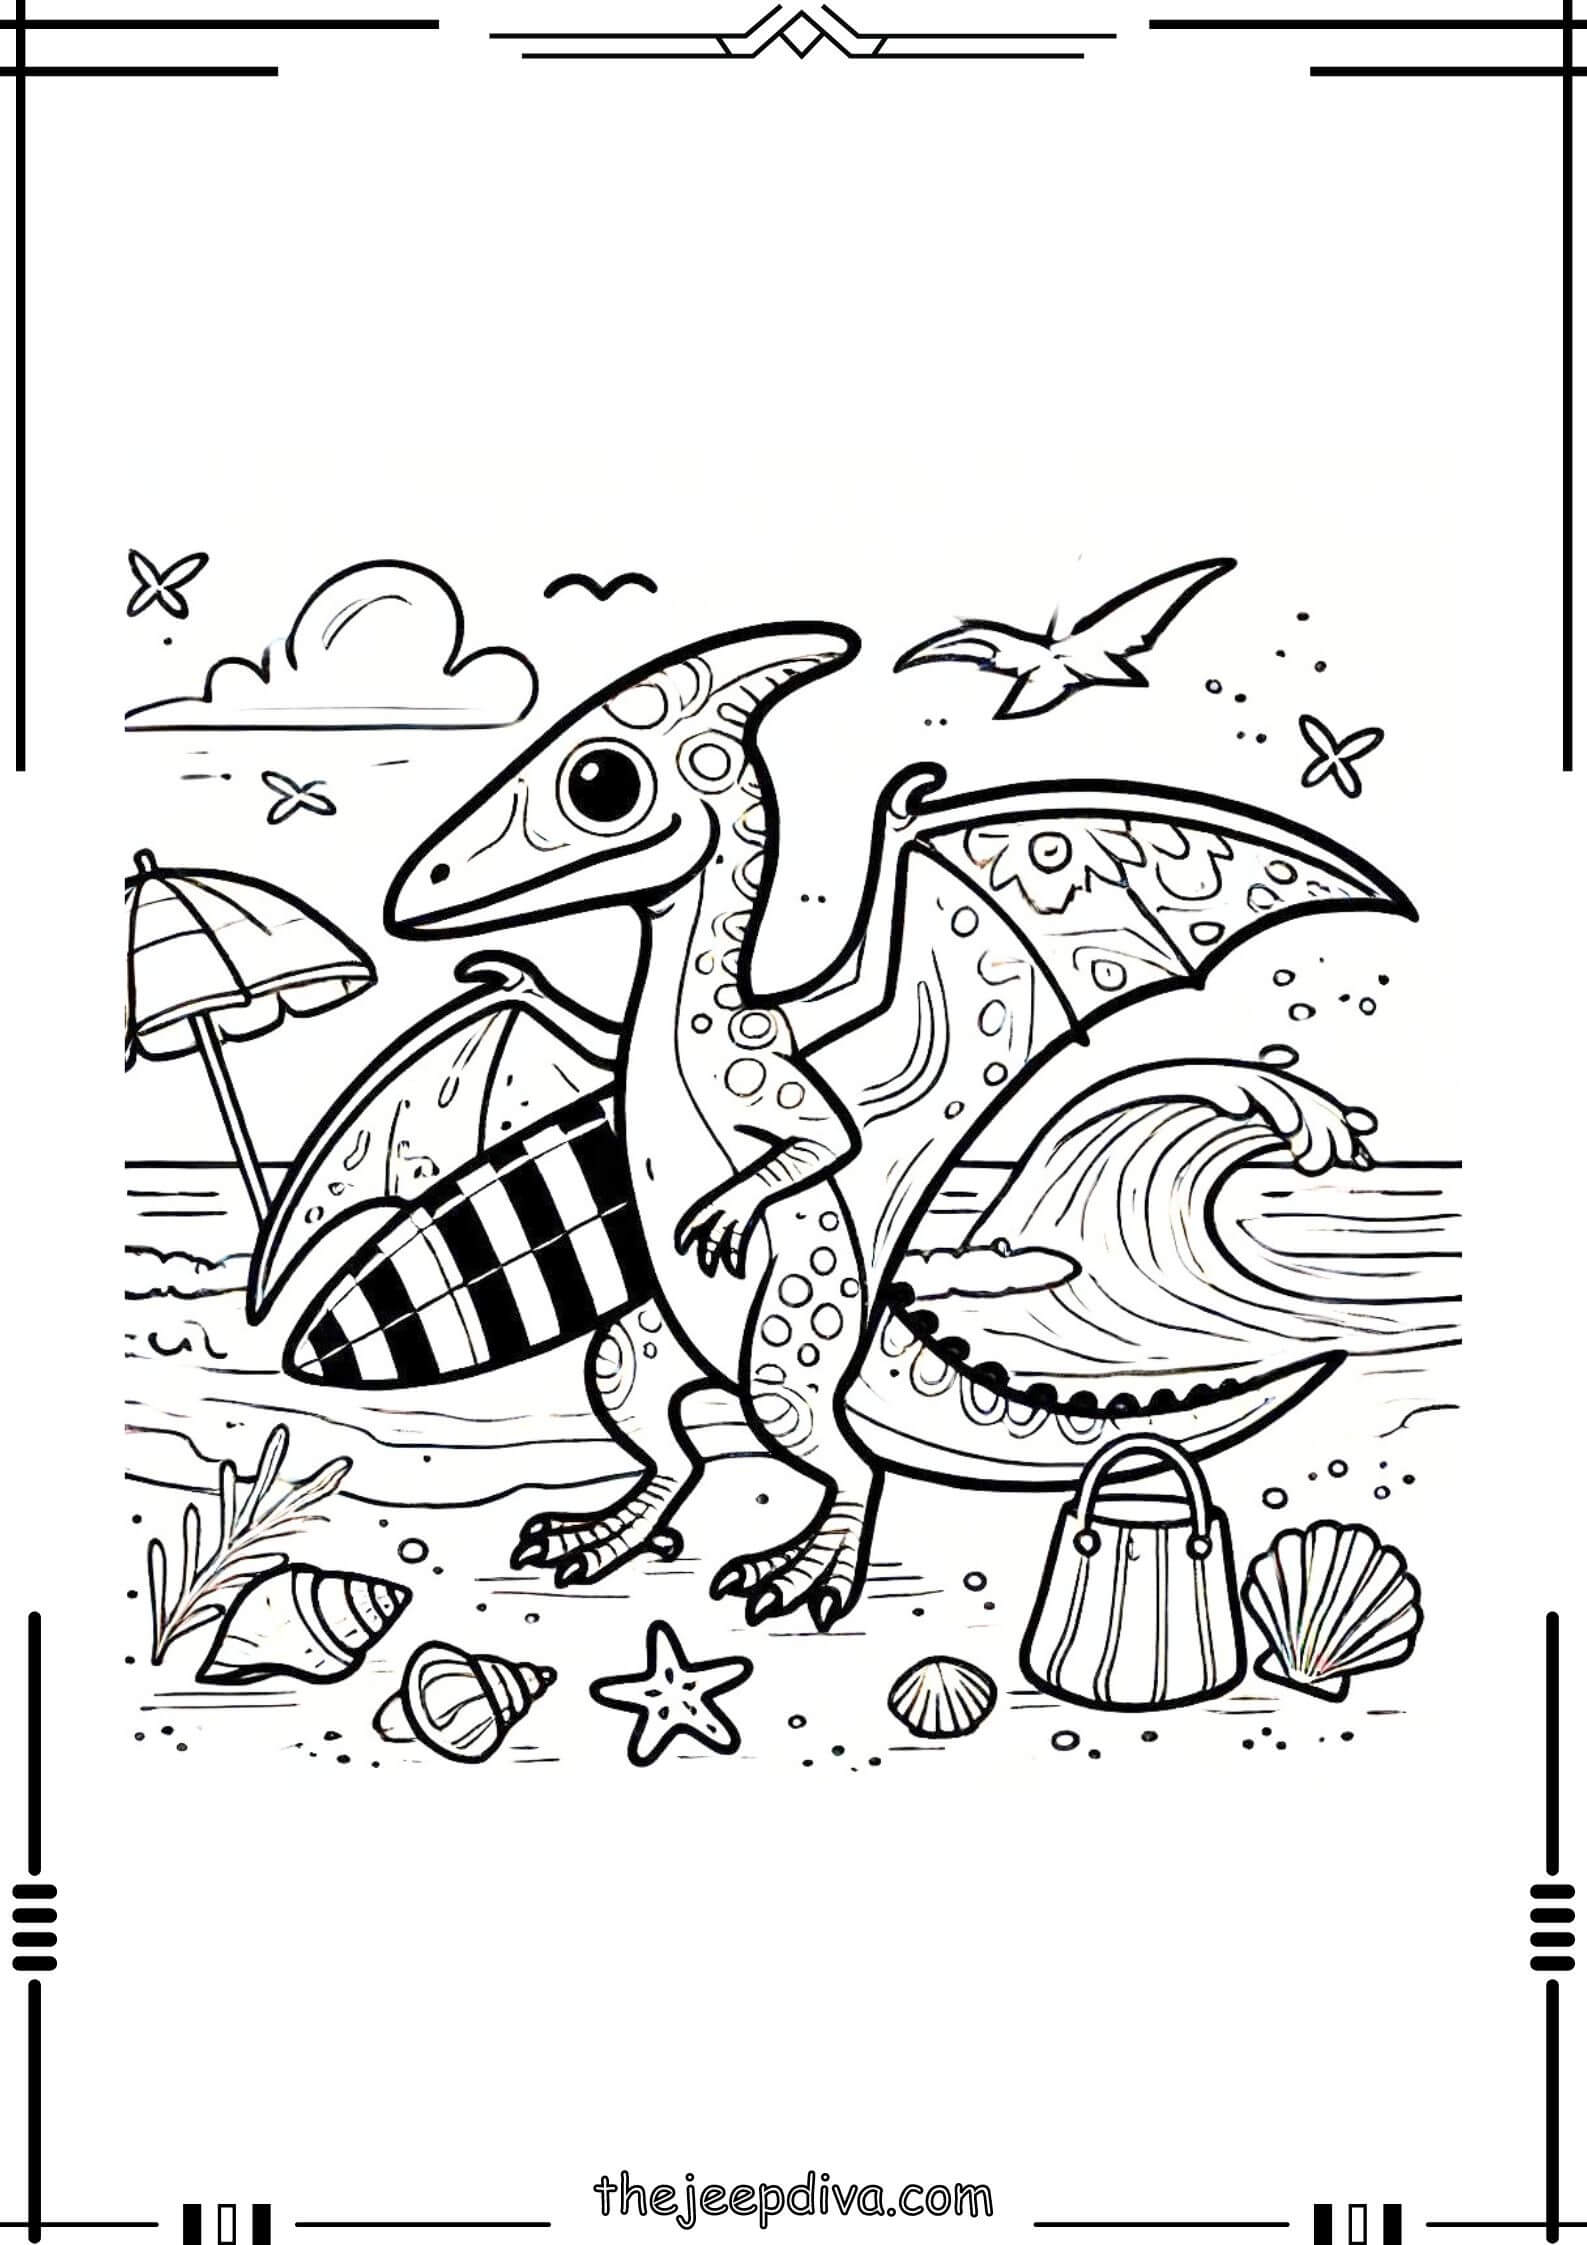 Dinosaur-Colouring-Pages-Hard-8